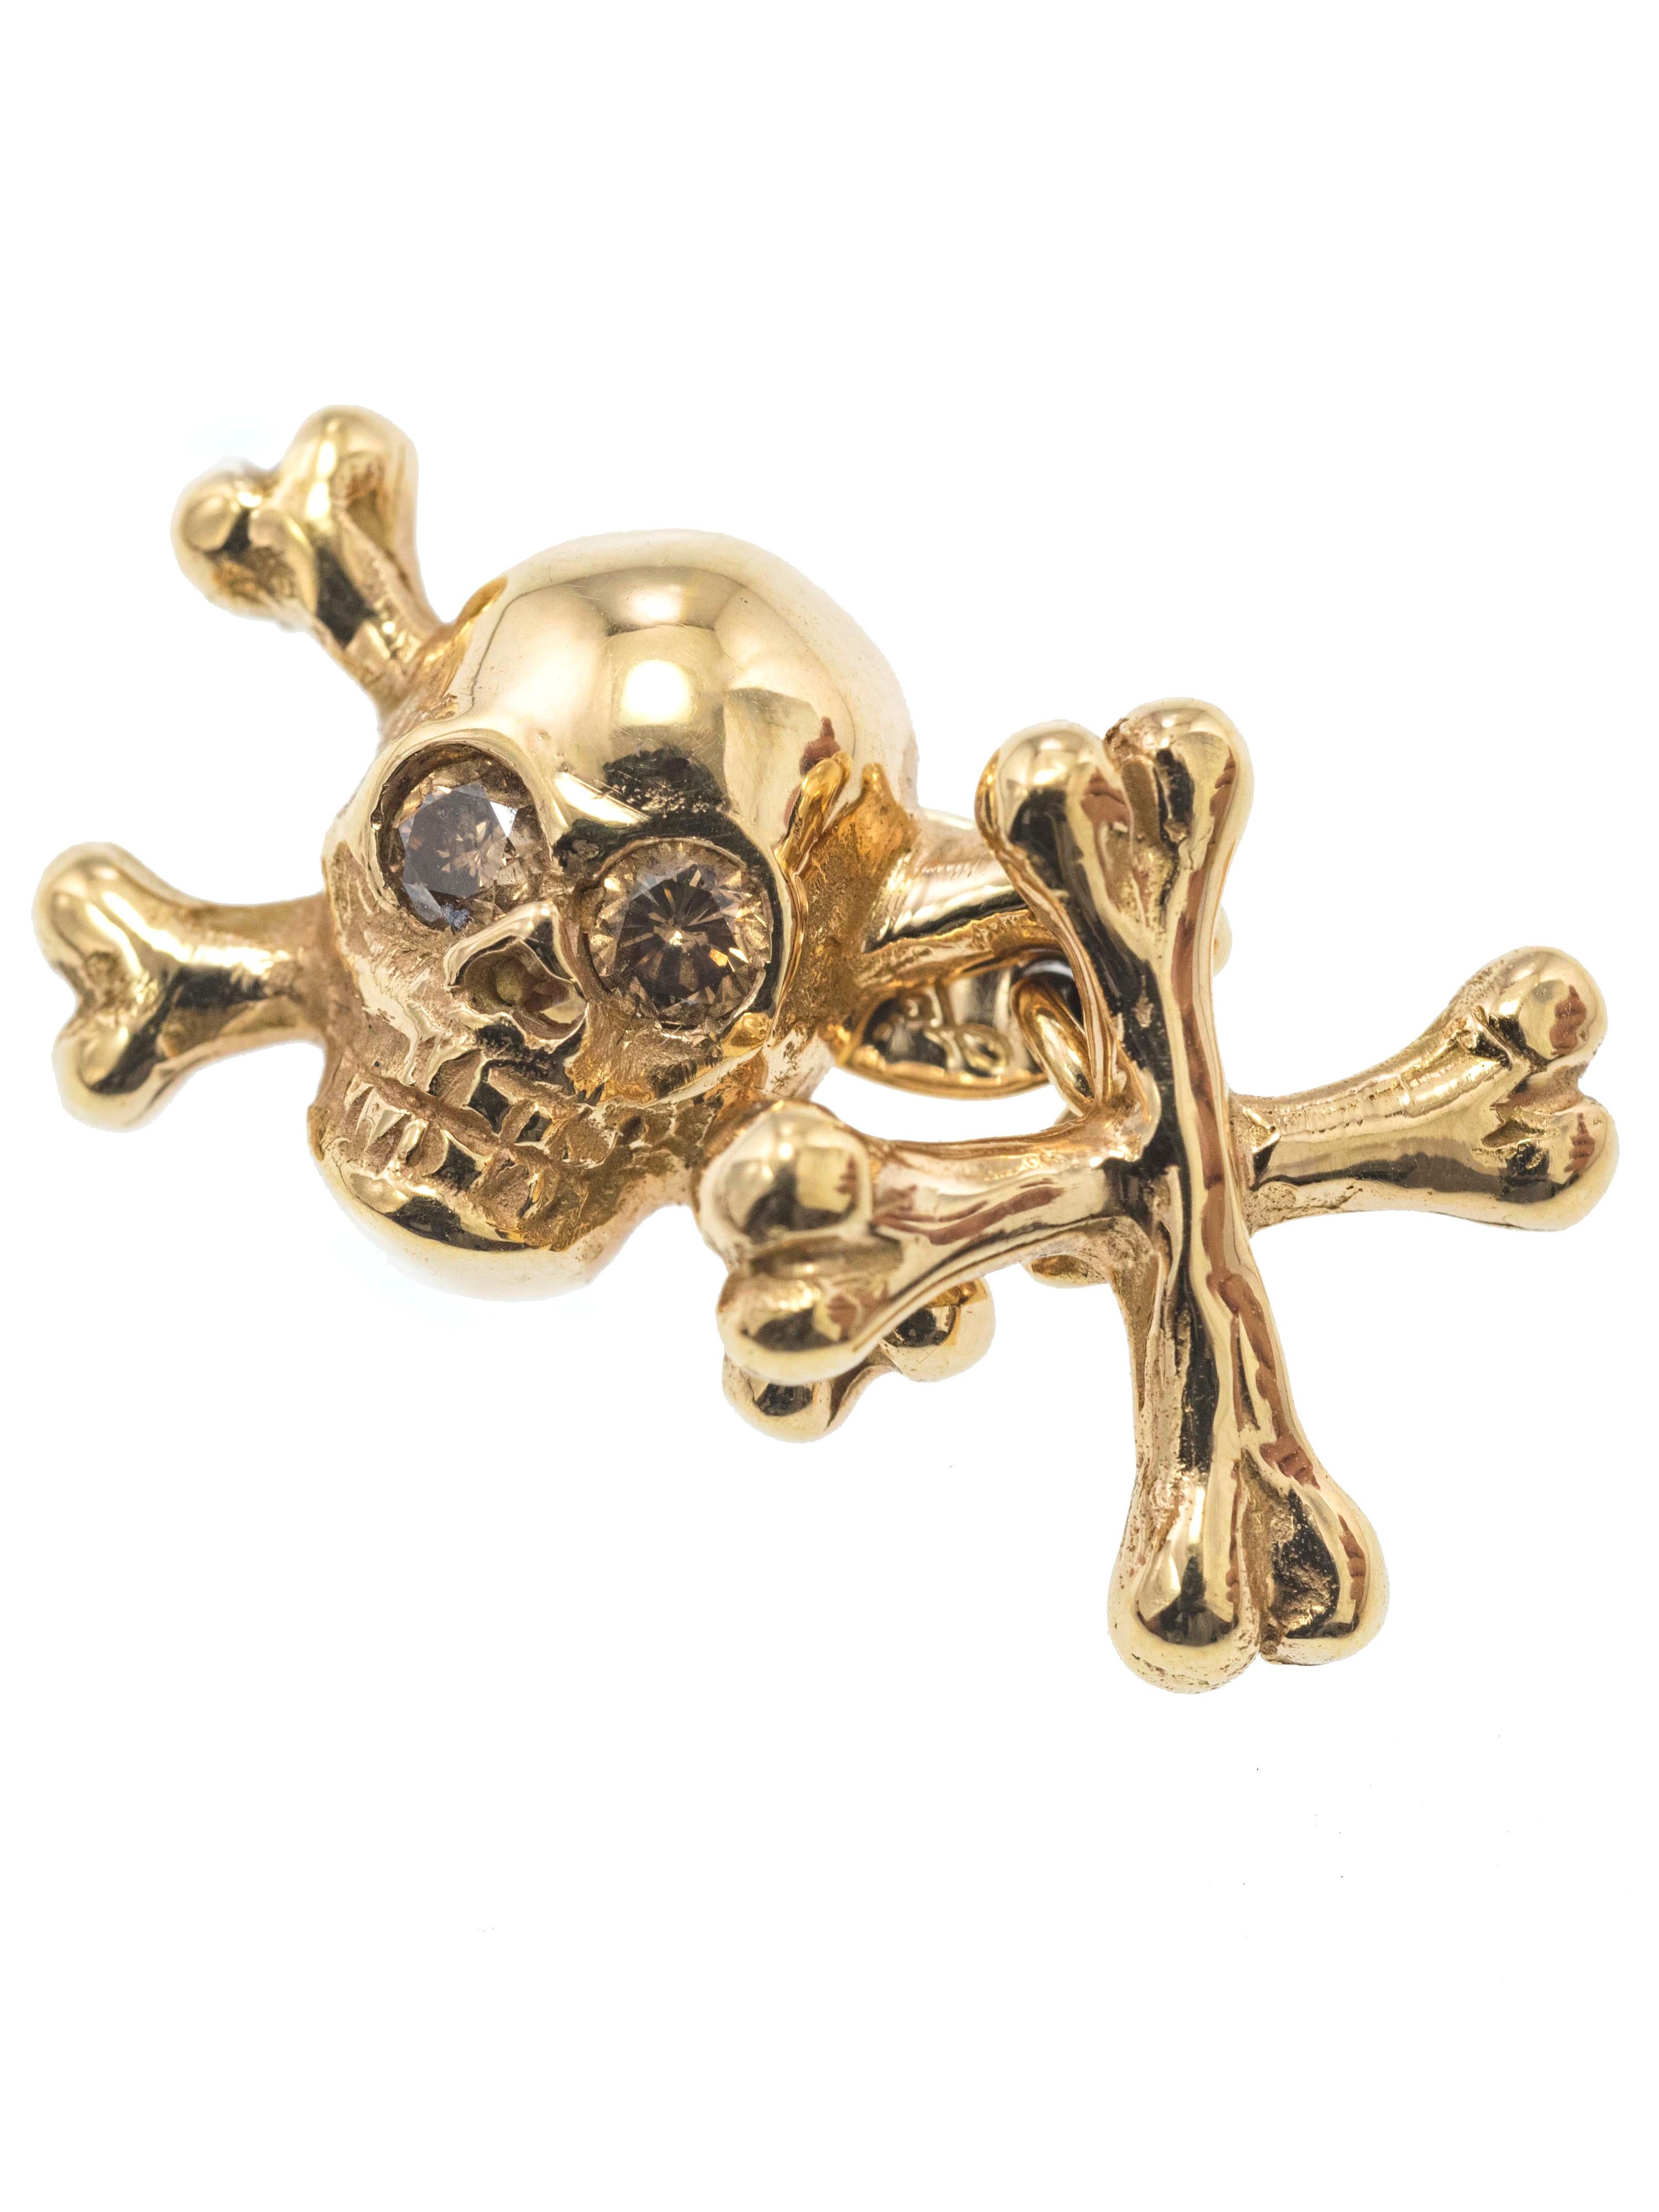 This gorgeous and particular cufflinks has a very high quality workmanship.
The skull in the front side has two brown Diamonds in the eyes for ct 0.43 in total.
The back of the cufflinks are two crossed bones .

Face measurements are approximately